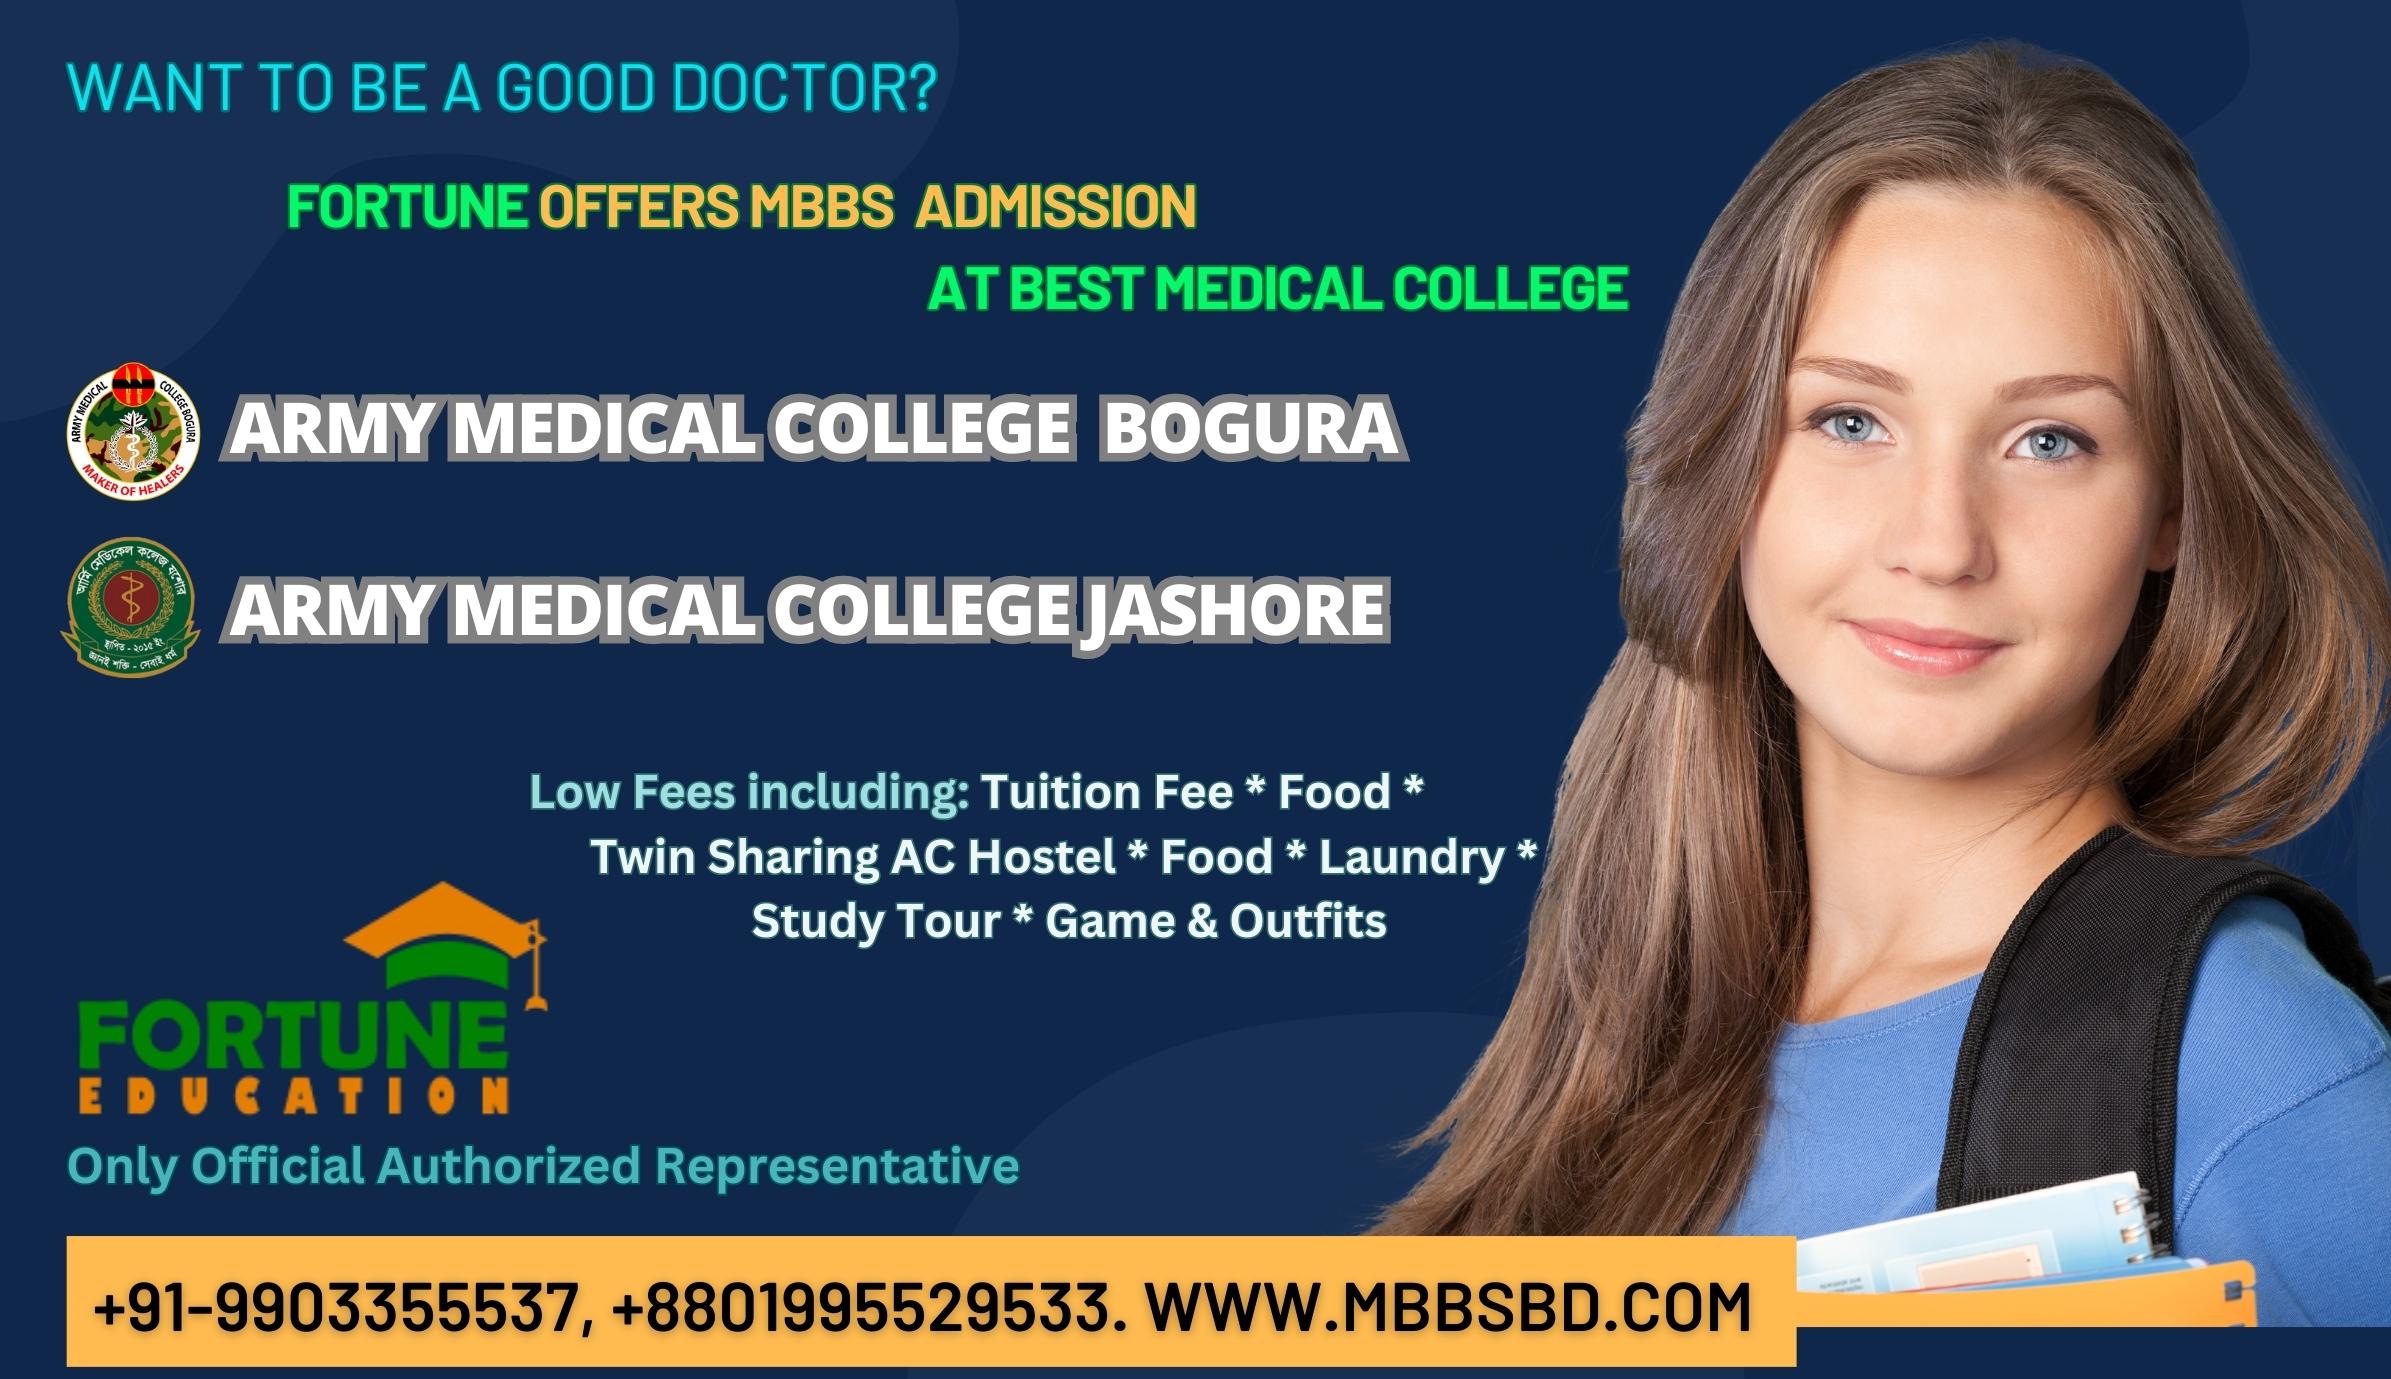 MBBS Admission in Army Medical Colleges in Bangladesh